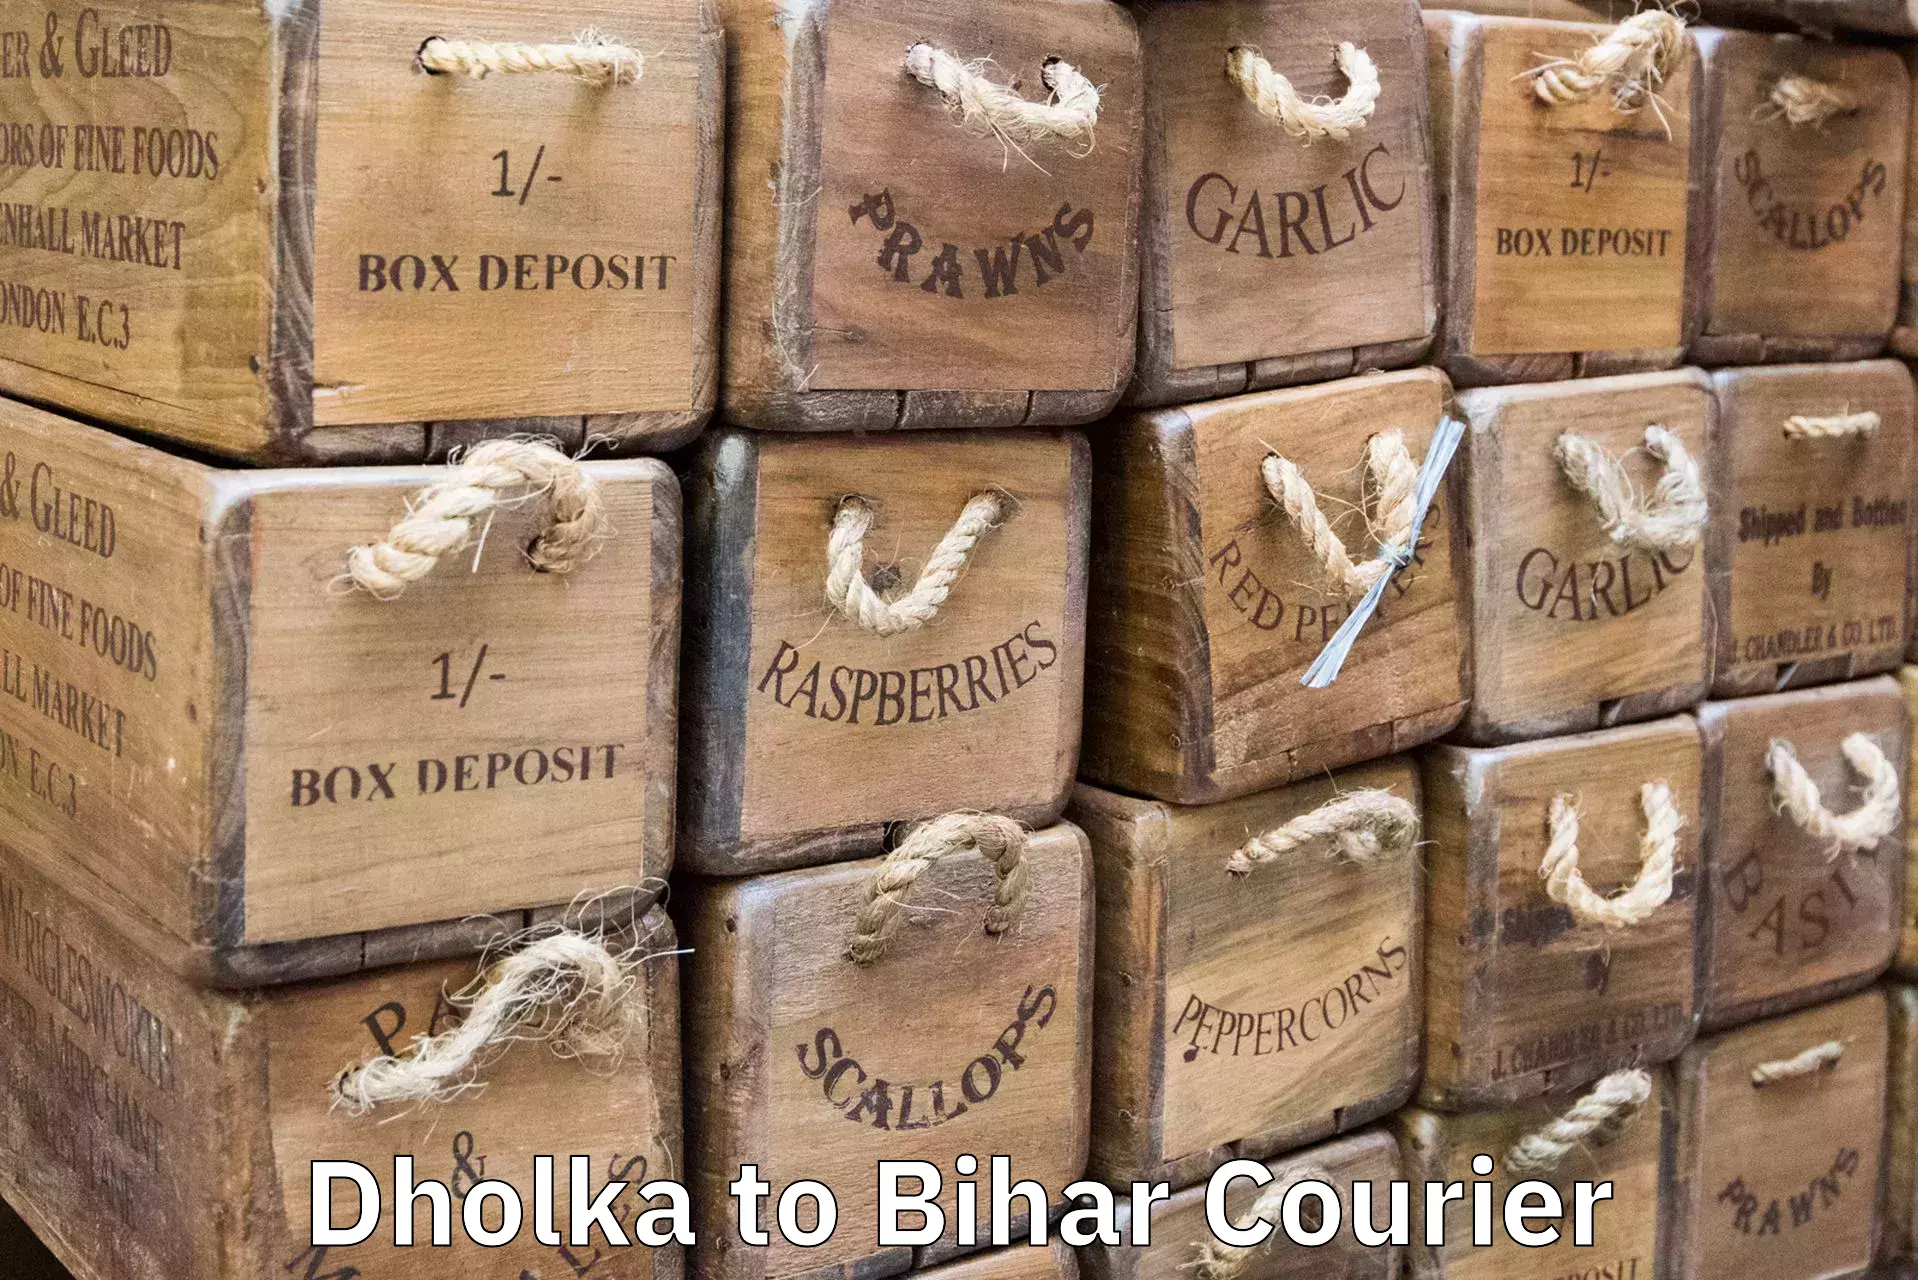 Luggage transport company Dholka to Fatwah